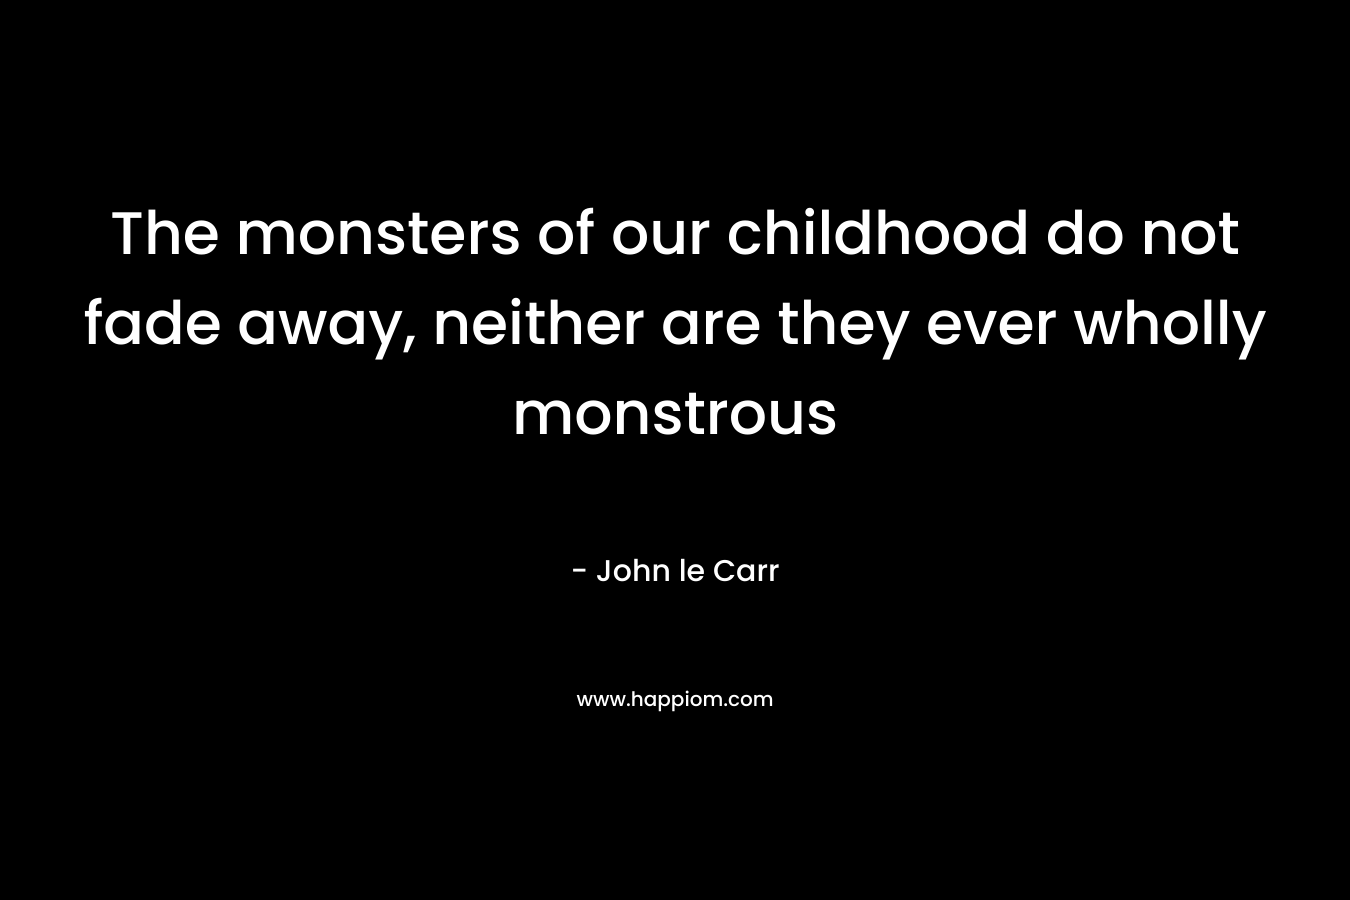 The monsters of our childhood do not fade away, neither are they ever wholly monstrous